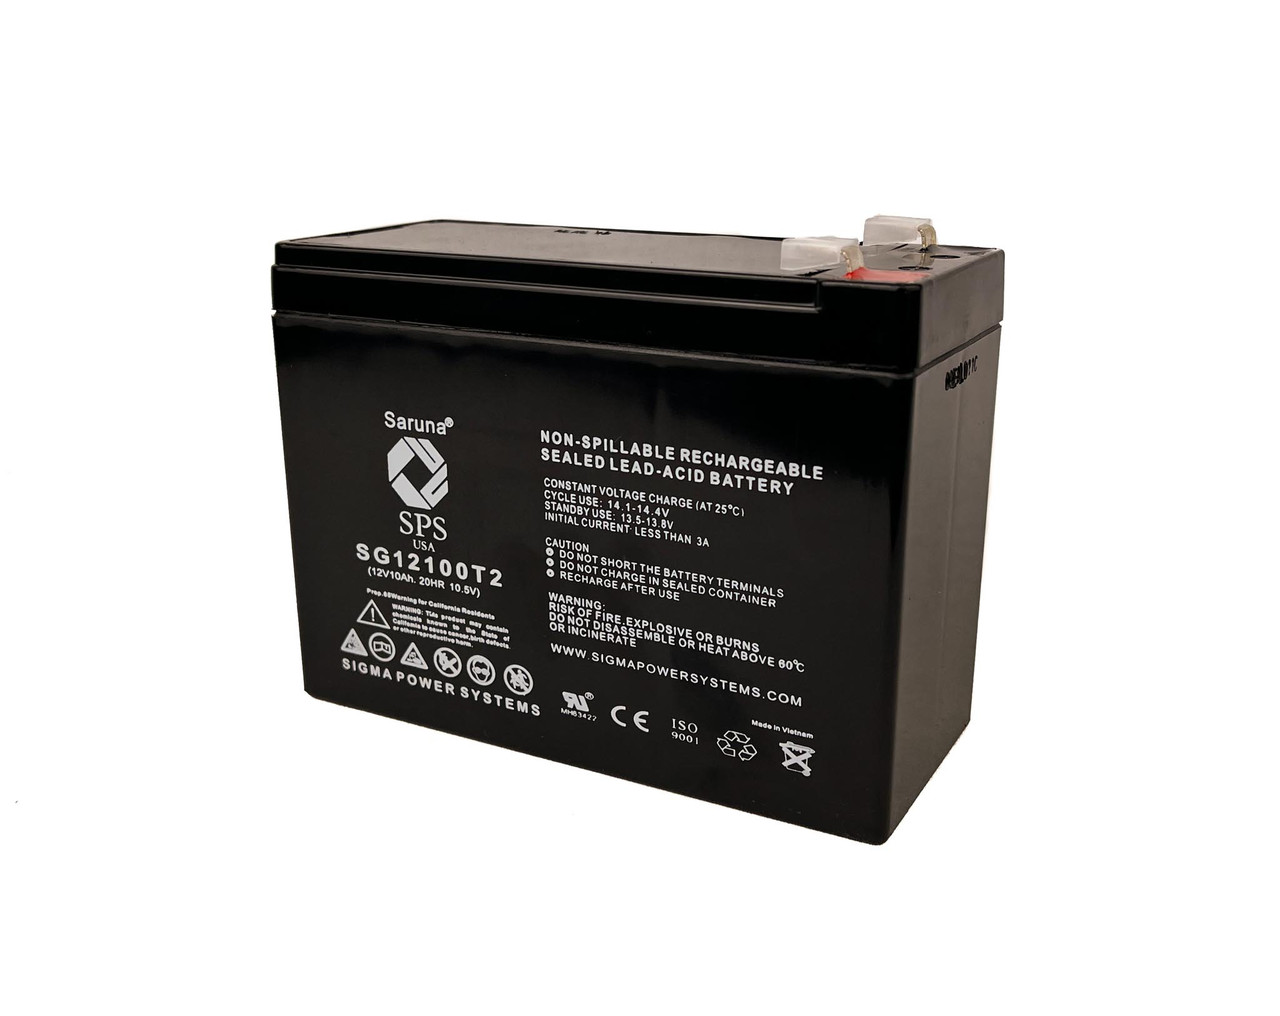 Raion Power 12V 10Ah Non-Spillable Replacement Rechargebale Battery for Mule PM12100